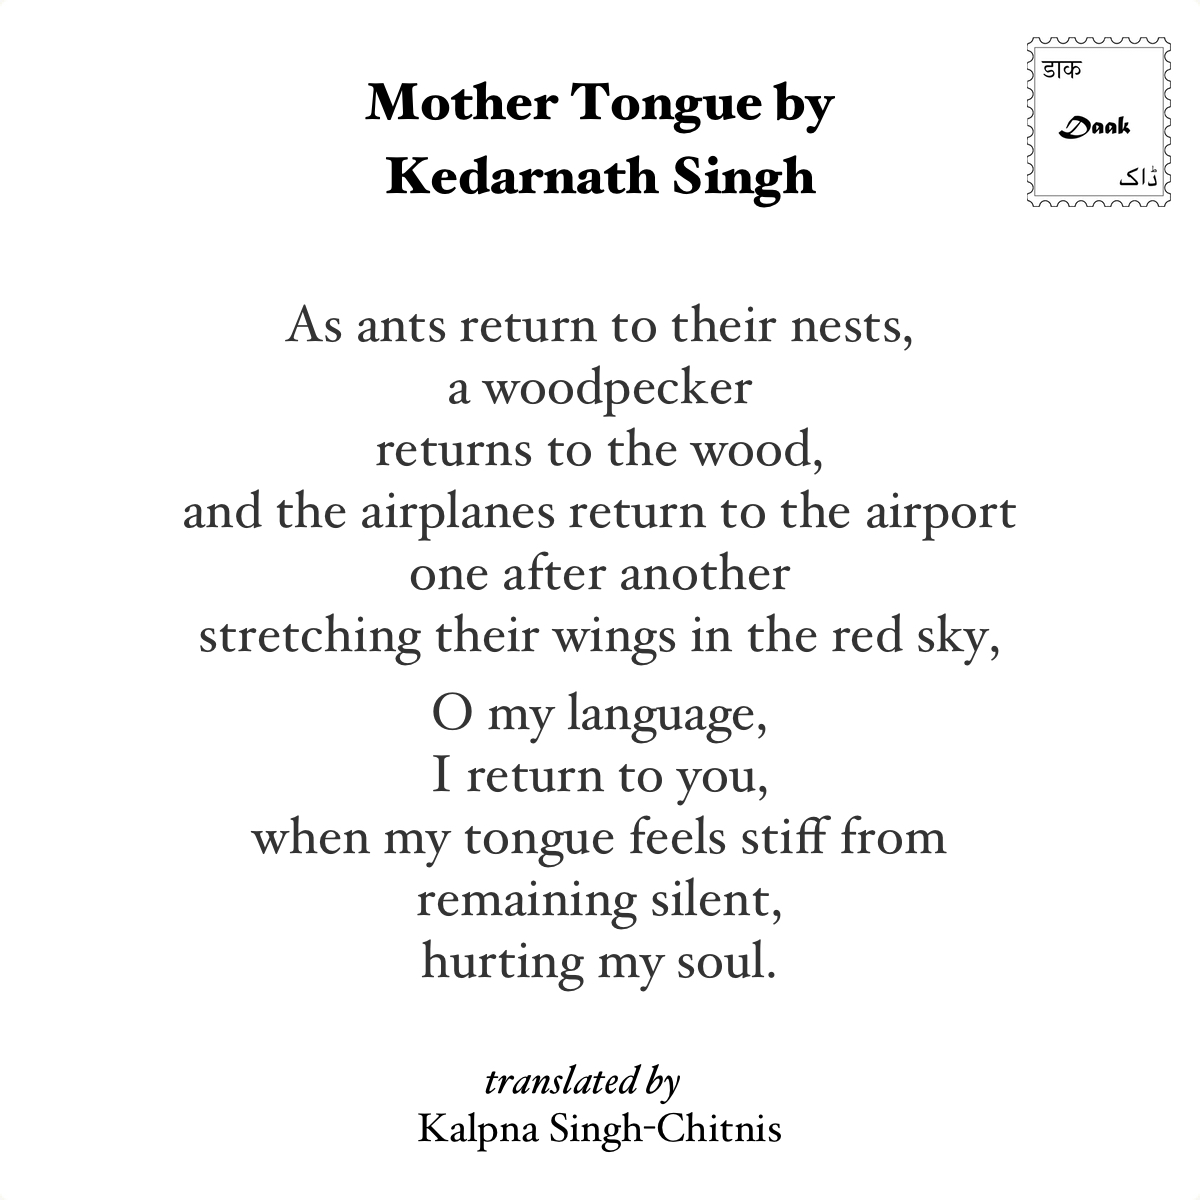 On International Mother Language Day, Kedarnath Singh does the articulation for us.